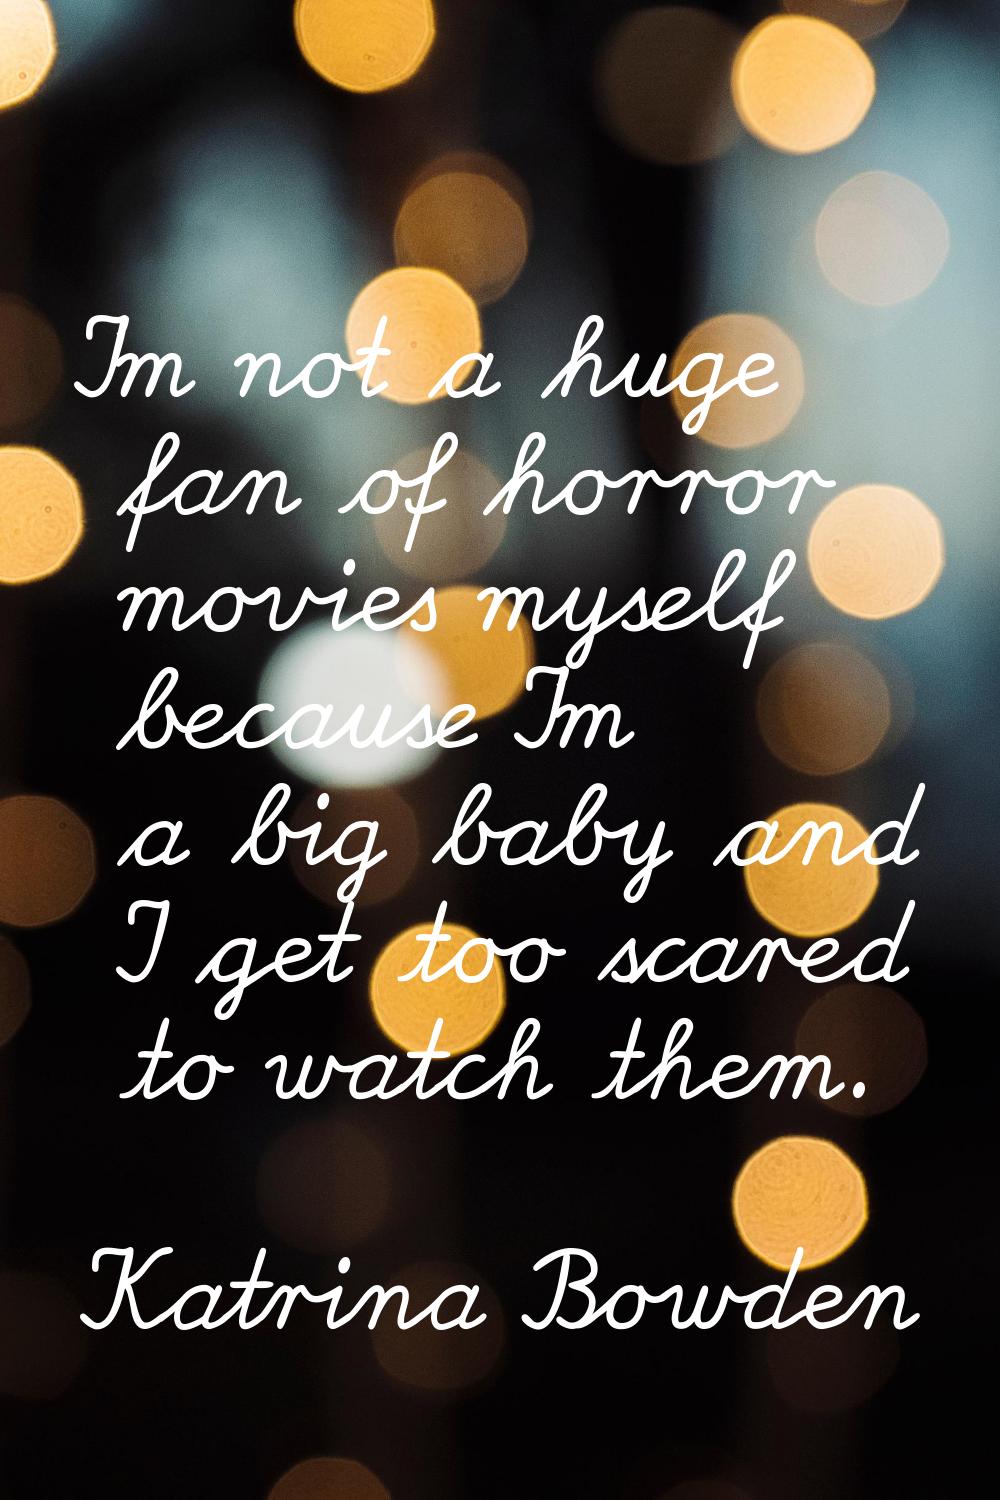 I'm not a huge fan of horror movies myself because I'm a big baby and I get too scared to watch the